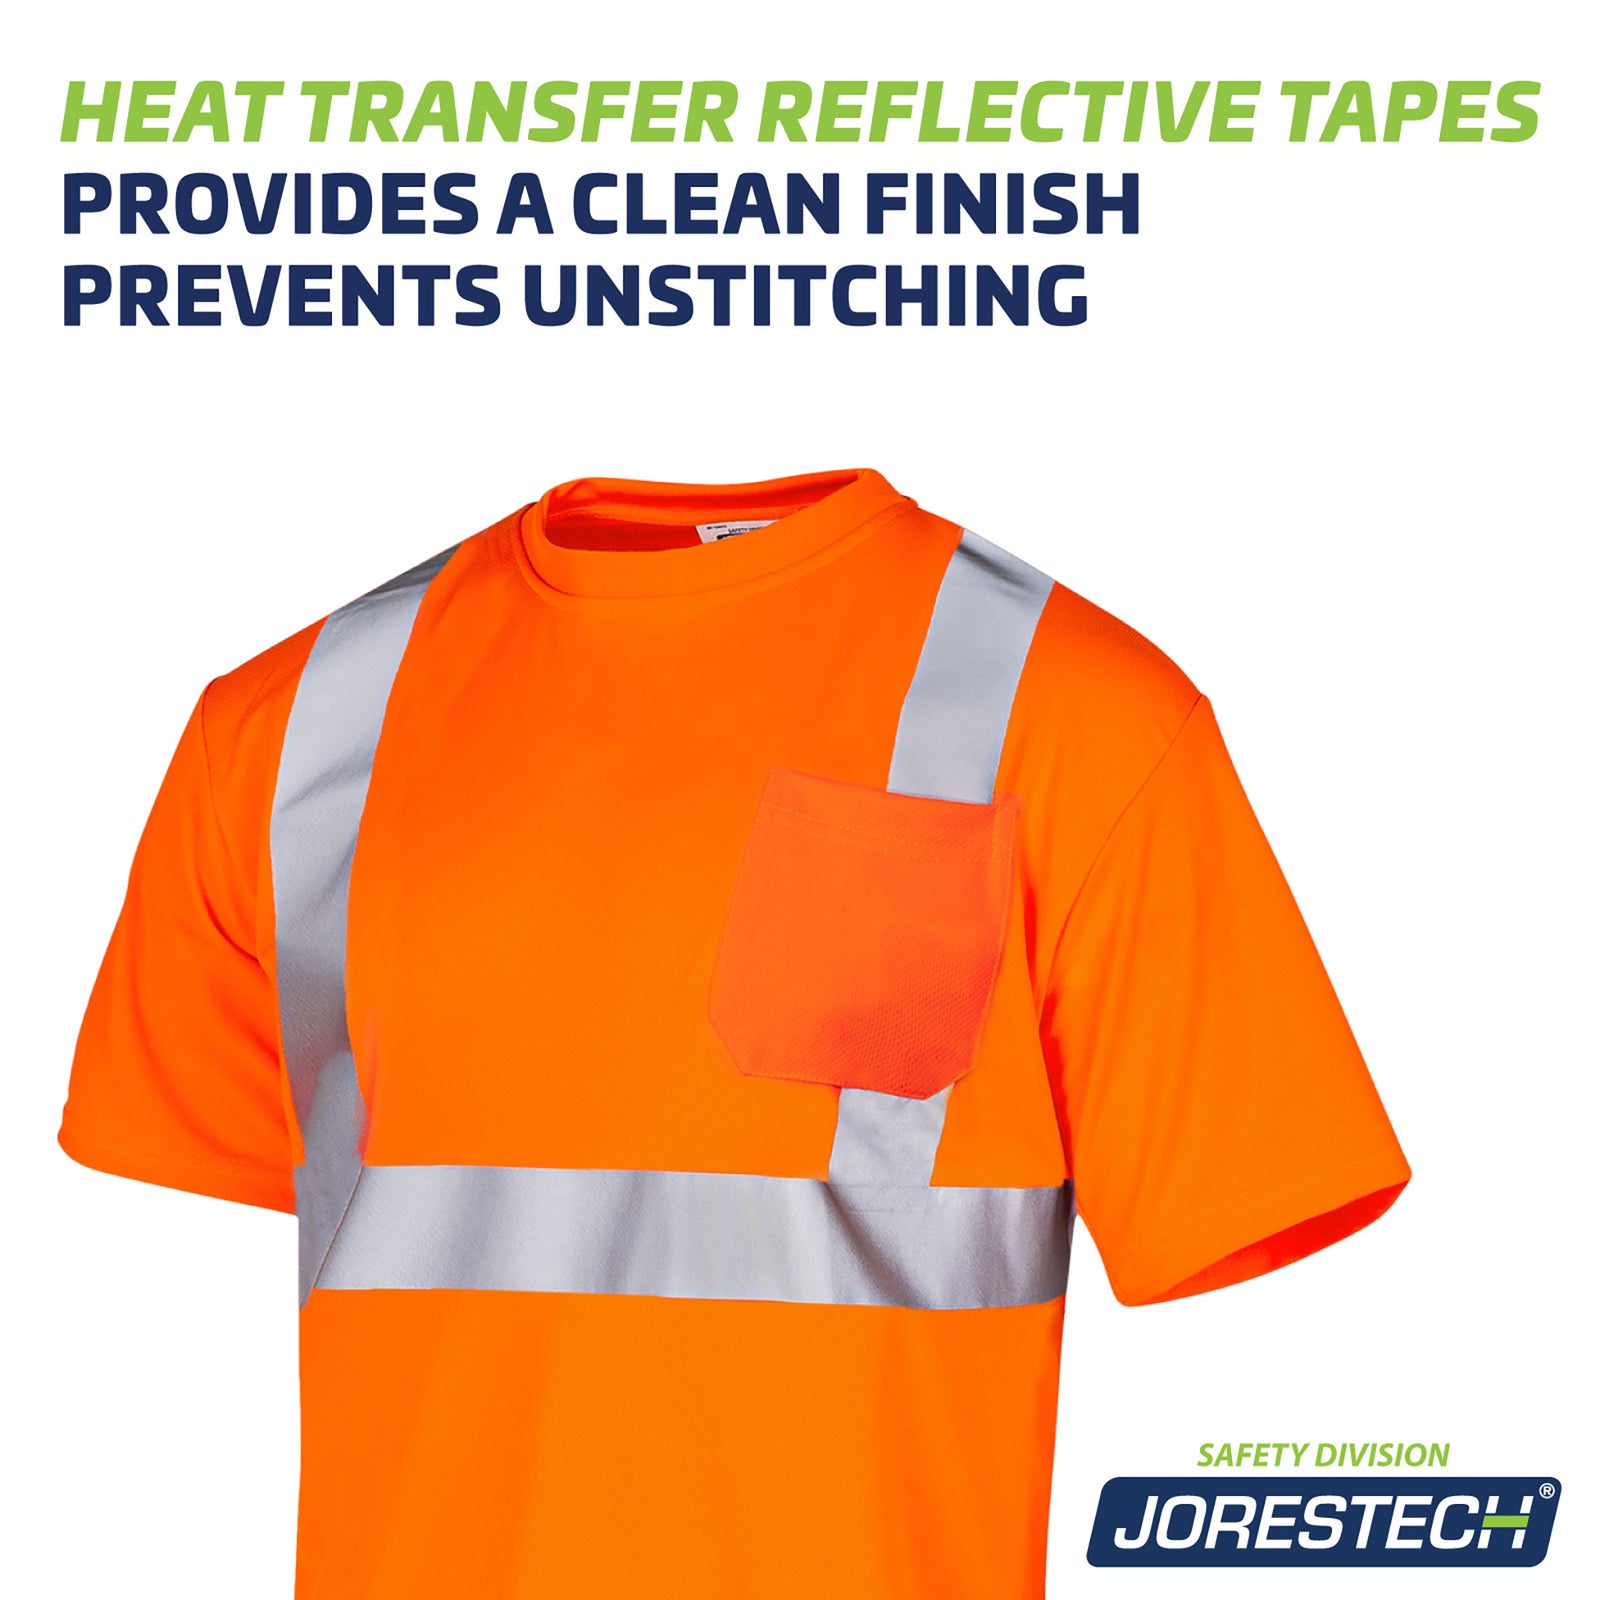 Close up of the orange reflective polyester safety shirt with heat transfer reflective strips. Text reads: Hear transfer reflective tapes provide a clean finish and prevents unstitching